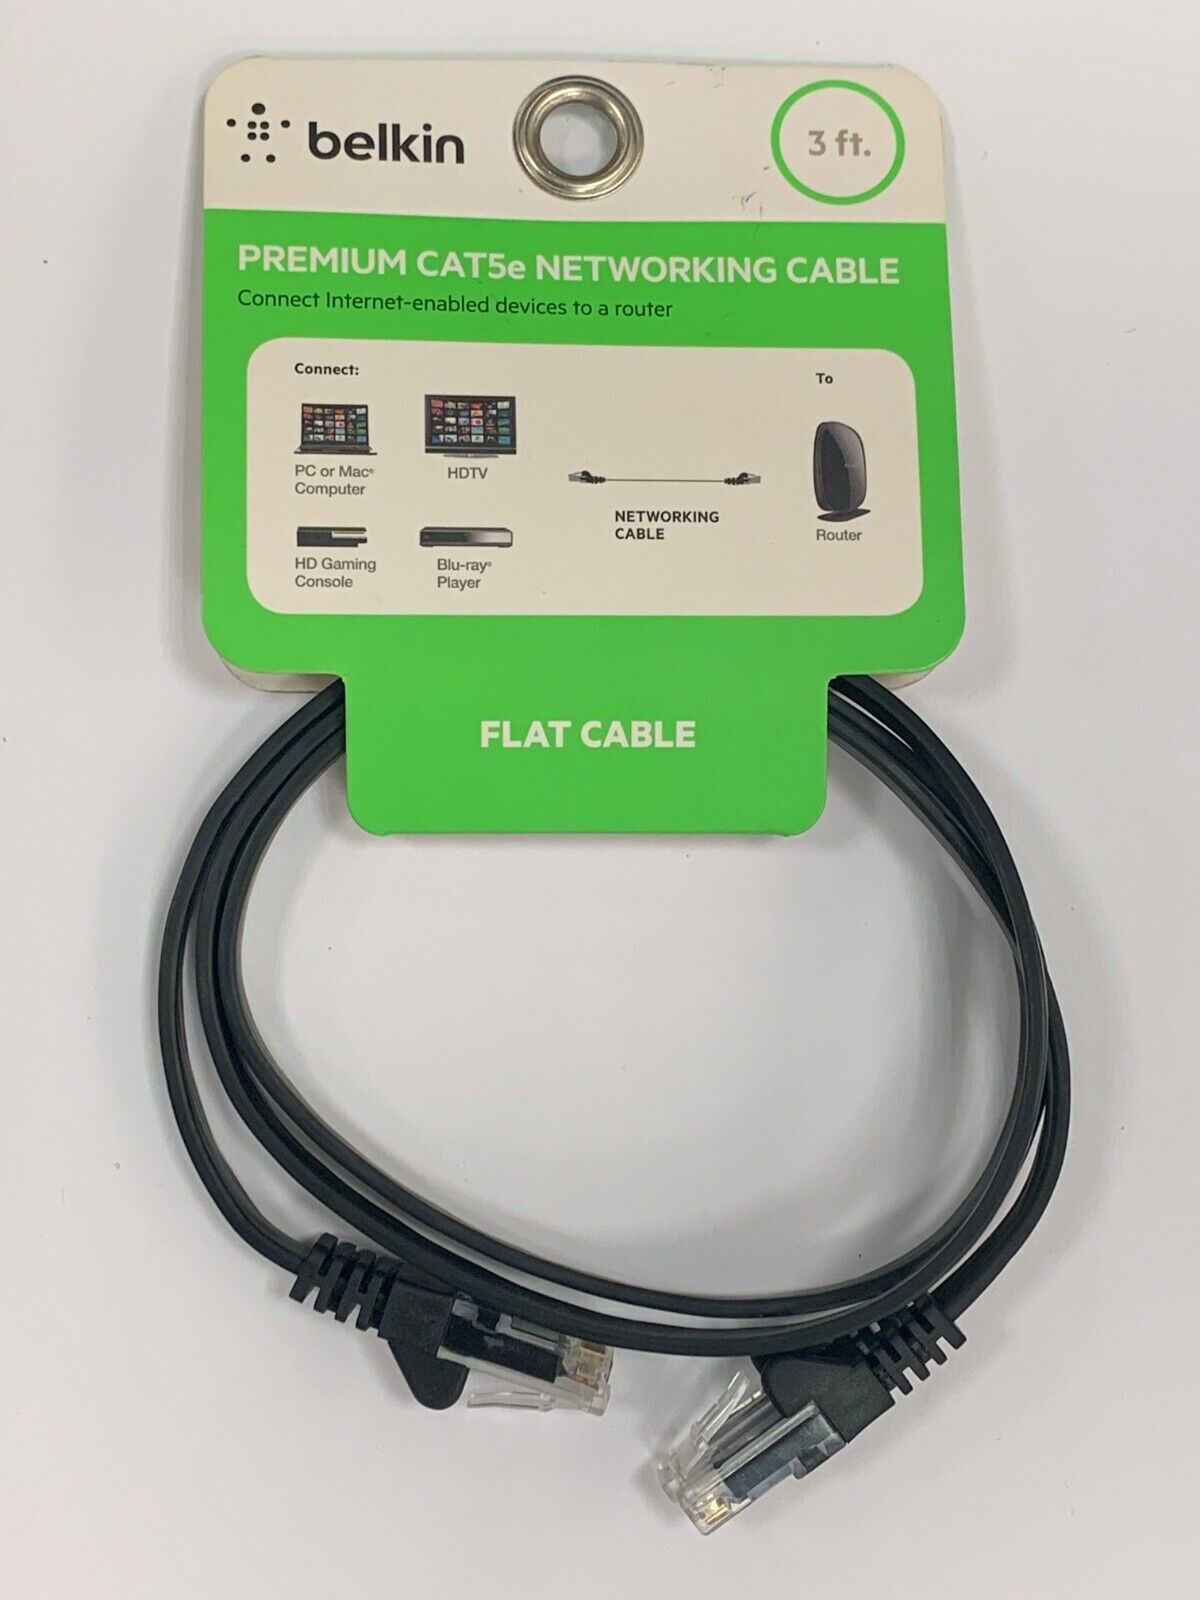 NEW Belkin Premium Flat Cat5e Ethernet Networking Cable, 3-Foot 3' Length, Black